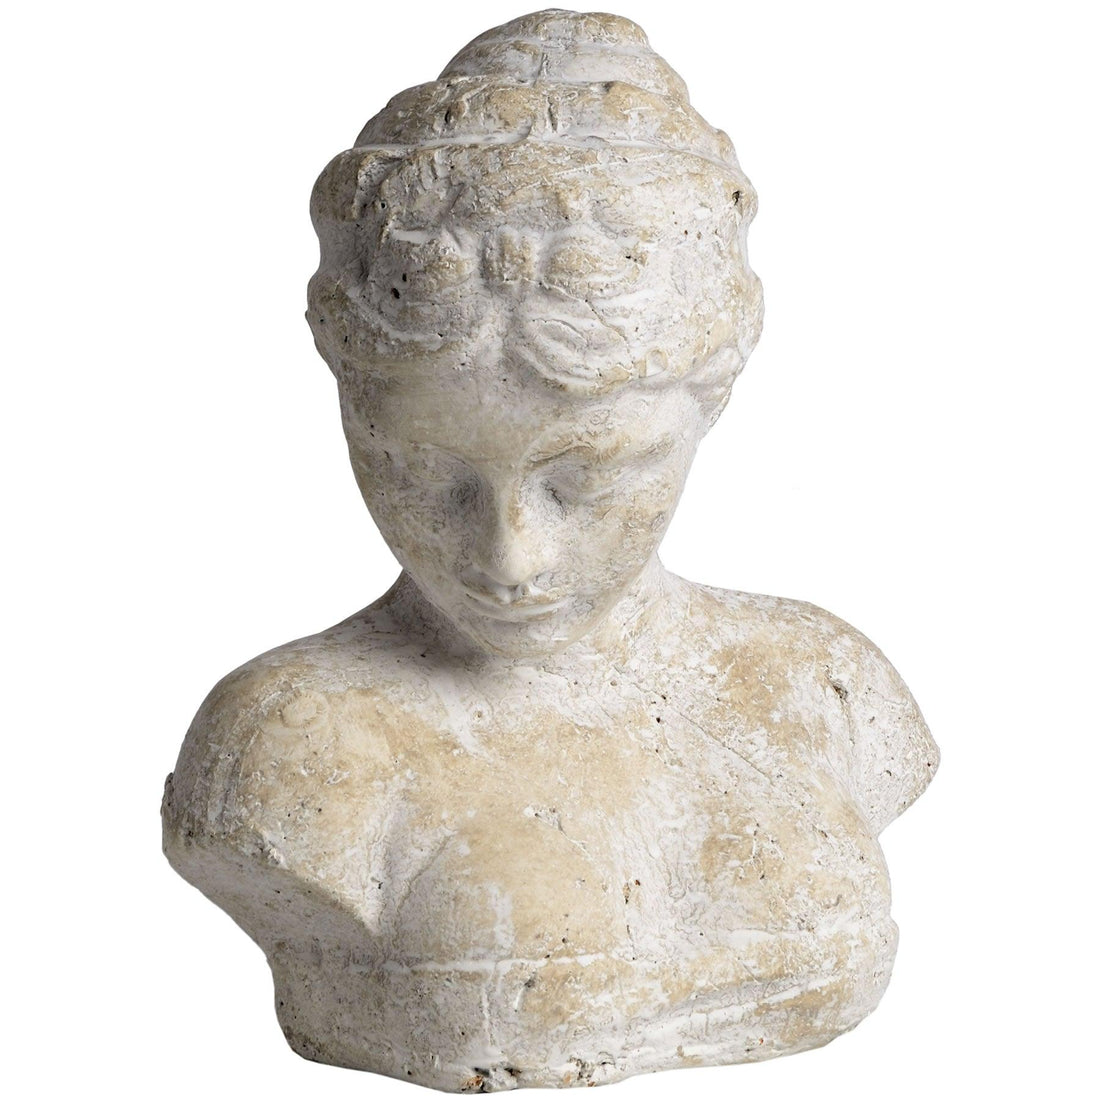 Woman's Head Icon - £49.95 - Gifts & Accessories > Ornaments > People Figurines 